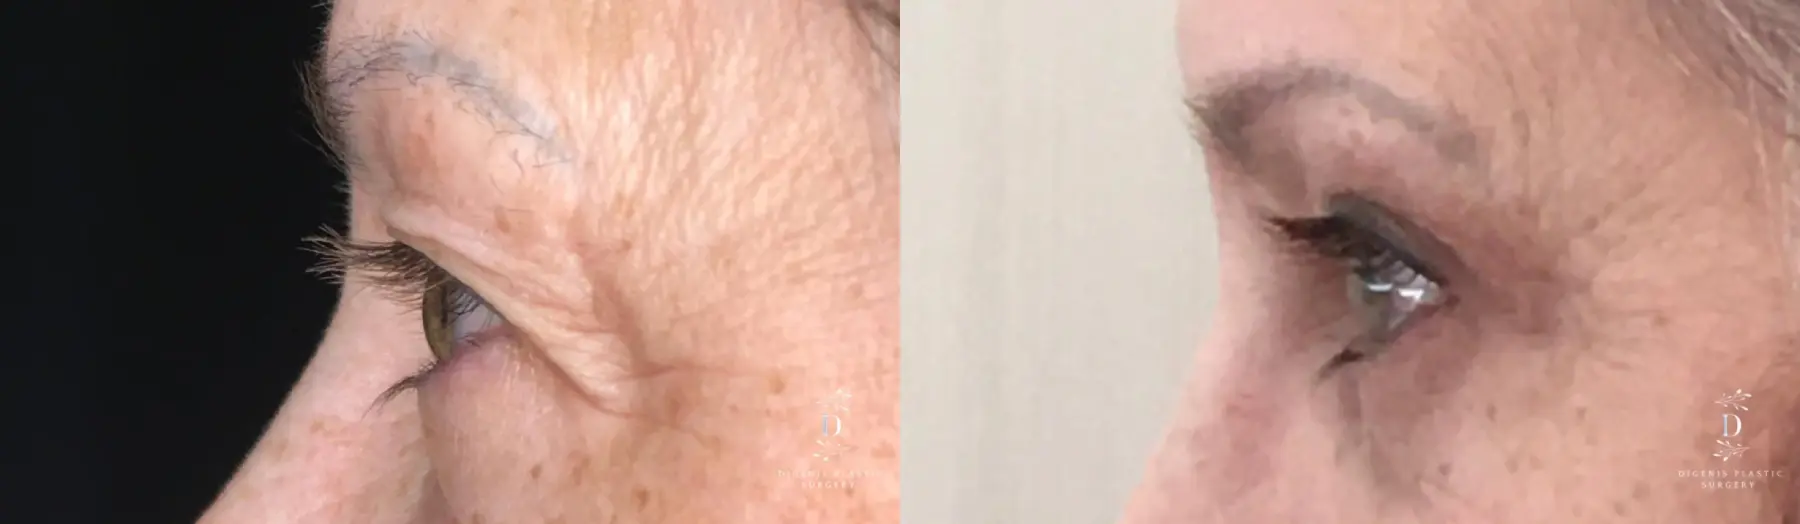 Eyelid Surgery: Patient 29 - Before and After 5